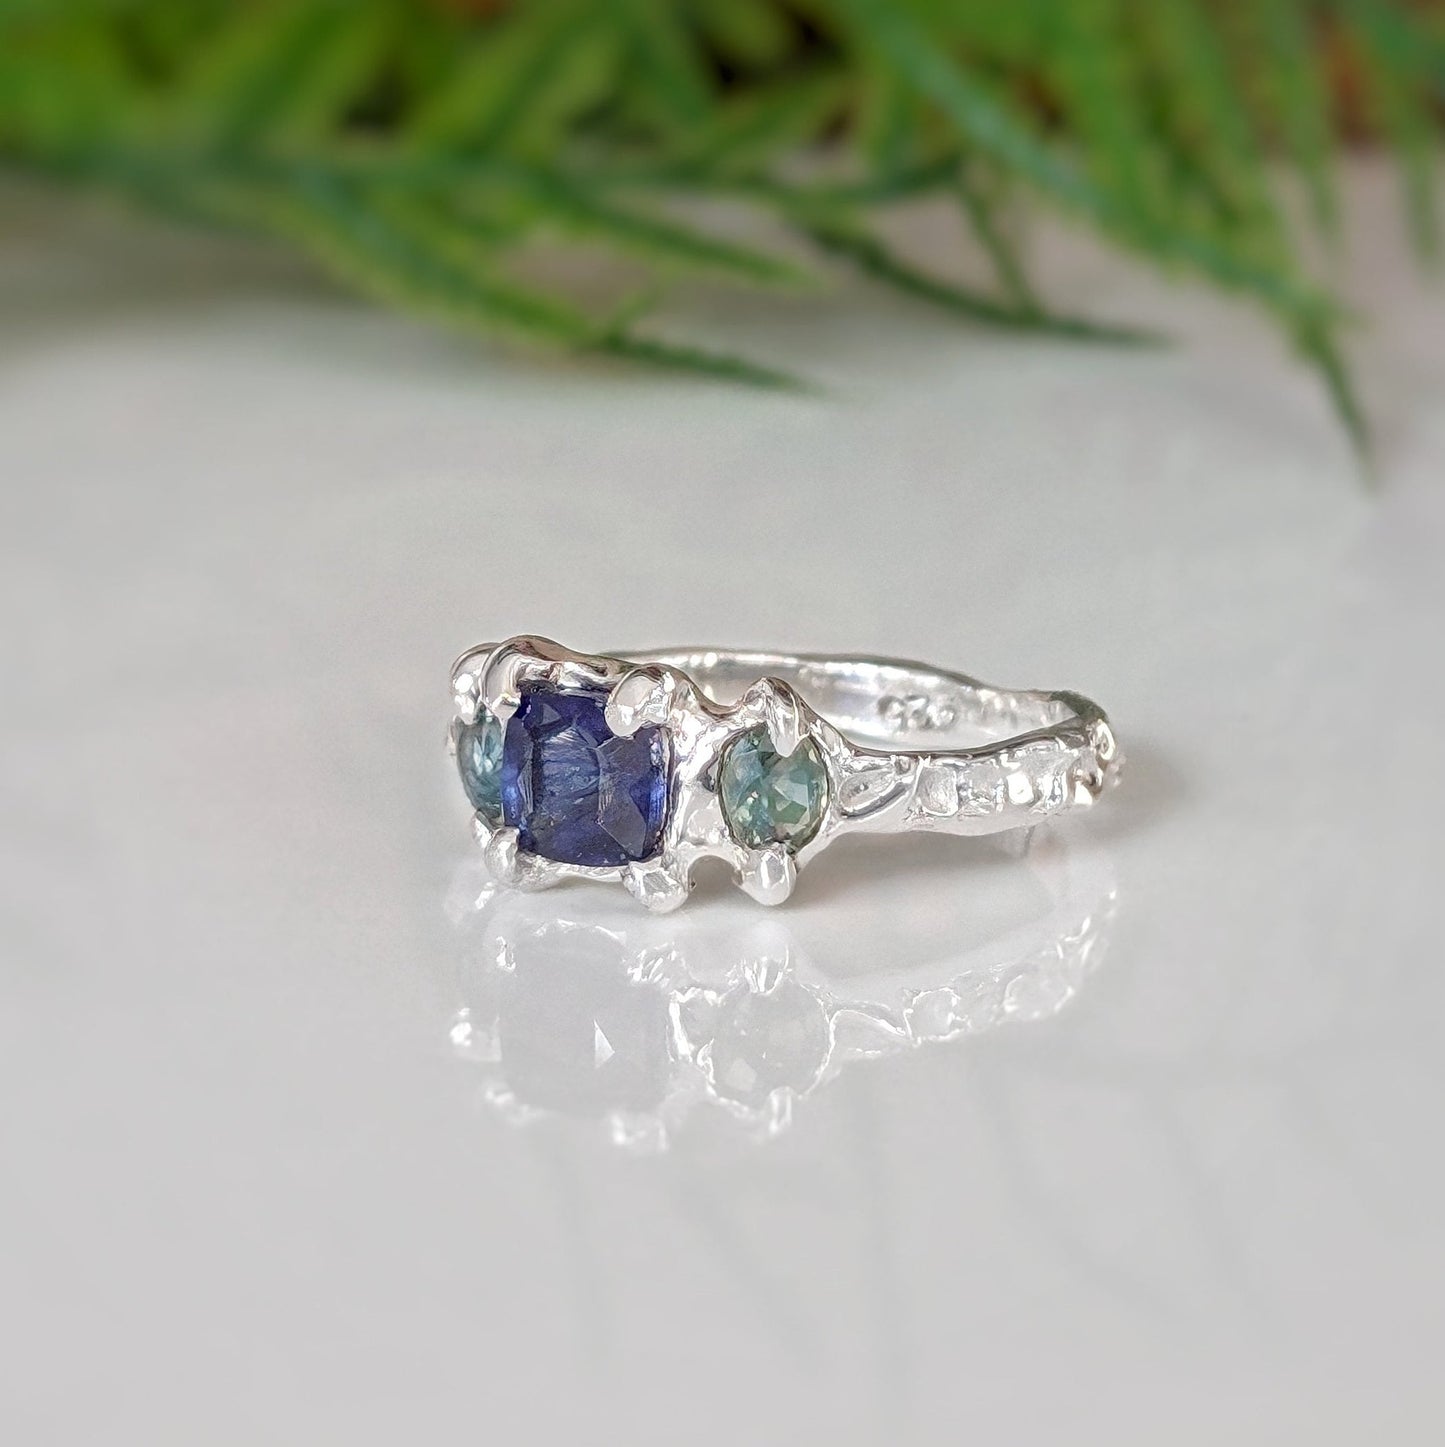 Blue Sapphire and Tourmaline ring in textured molten Silver setting